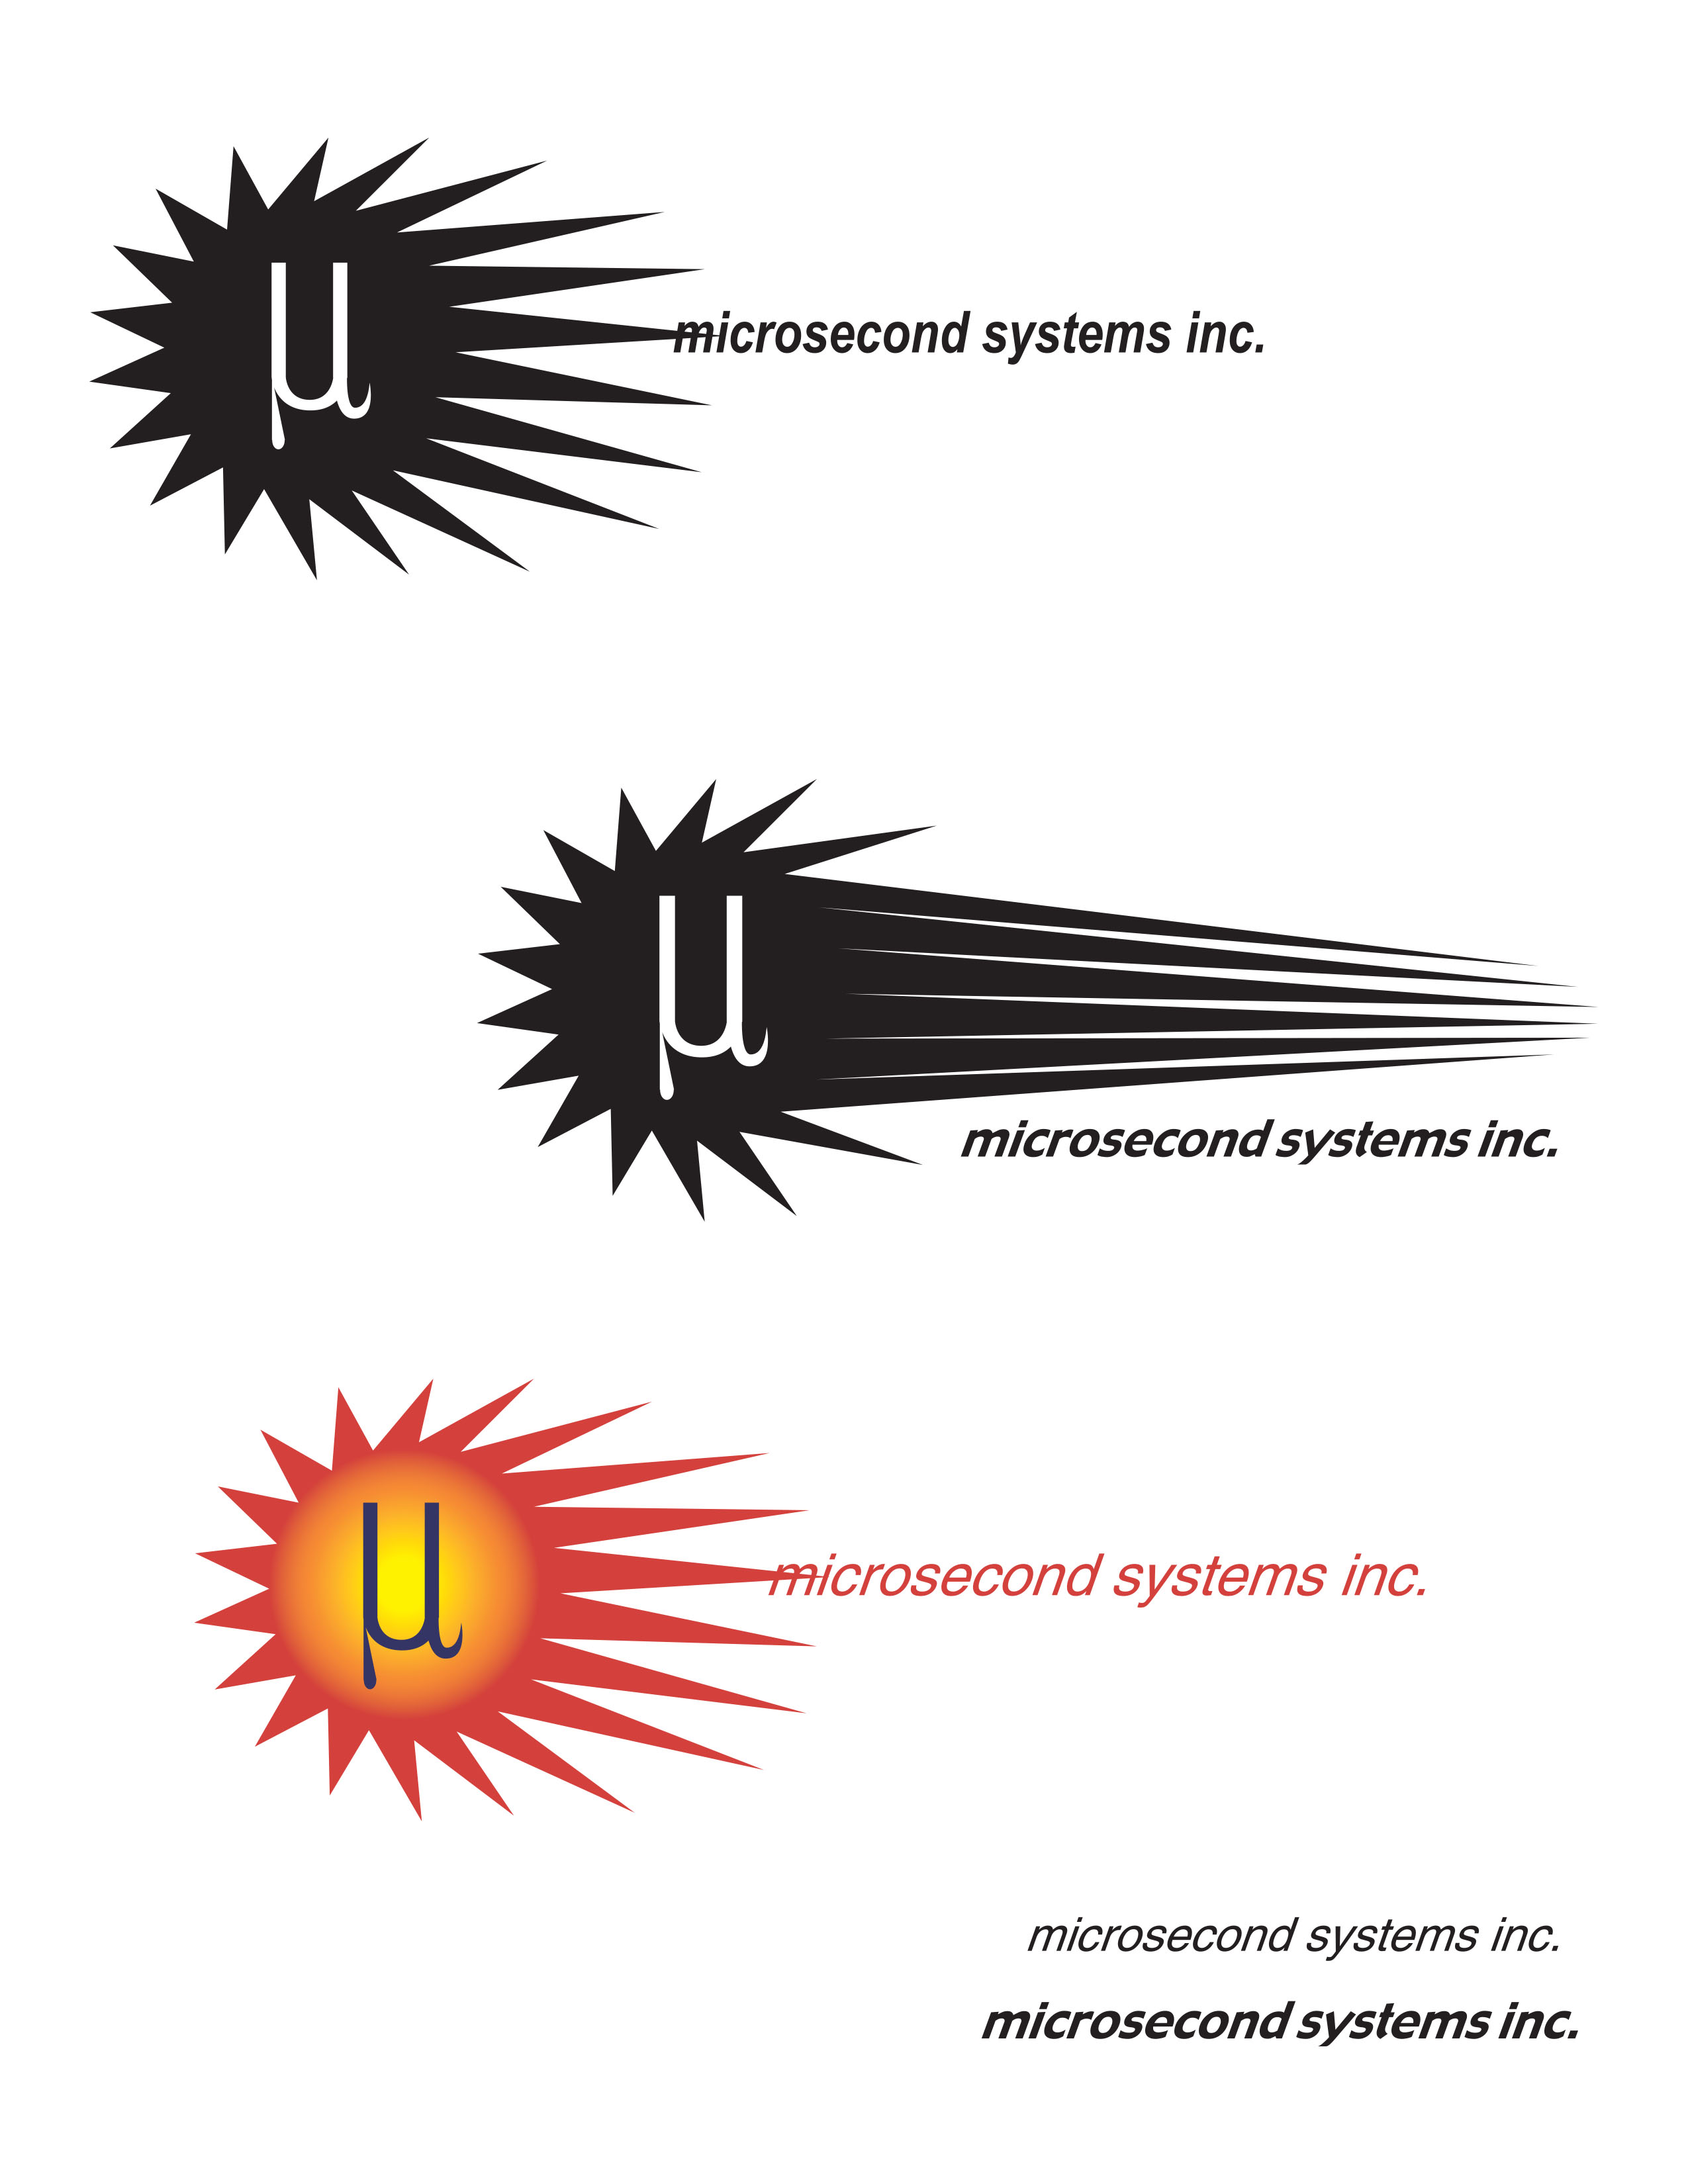 MICROSECOND SYSTEMS INC.